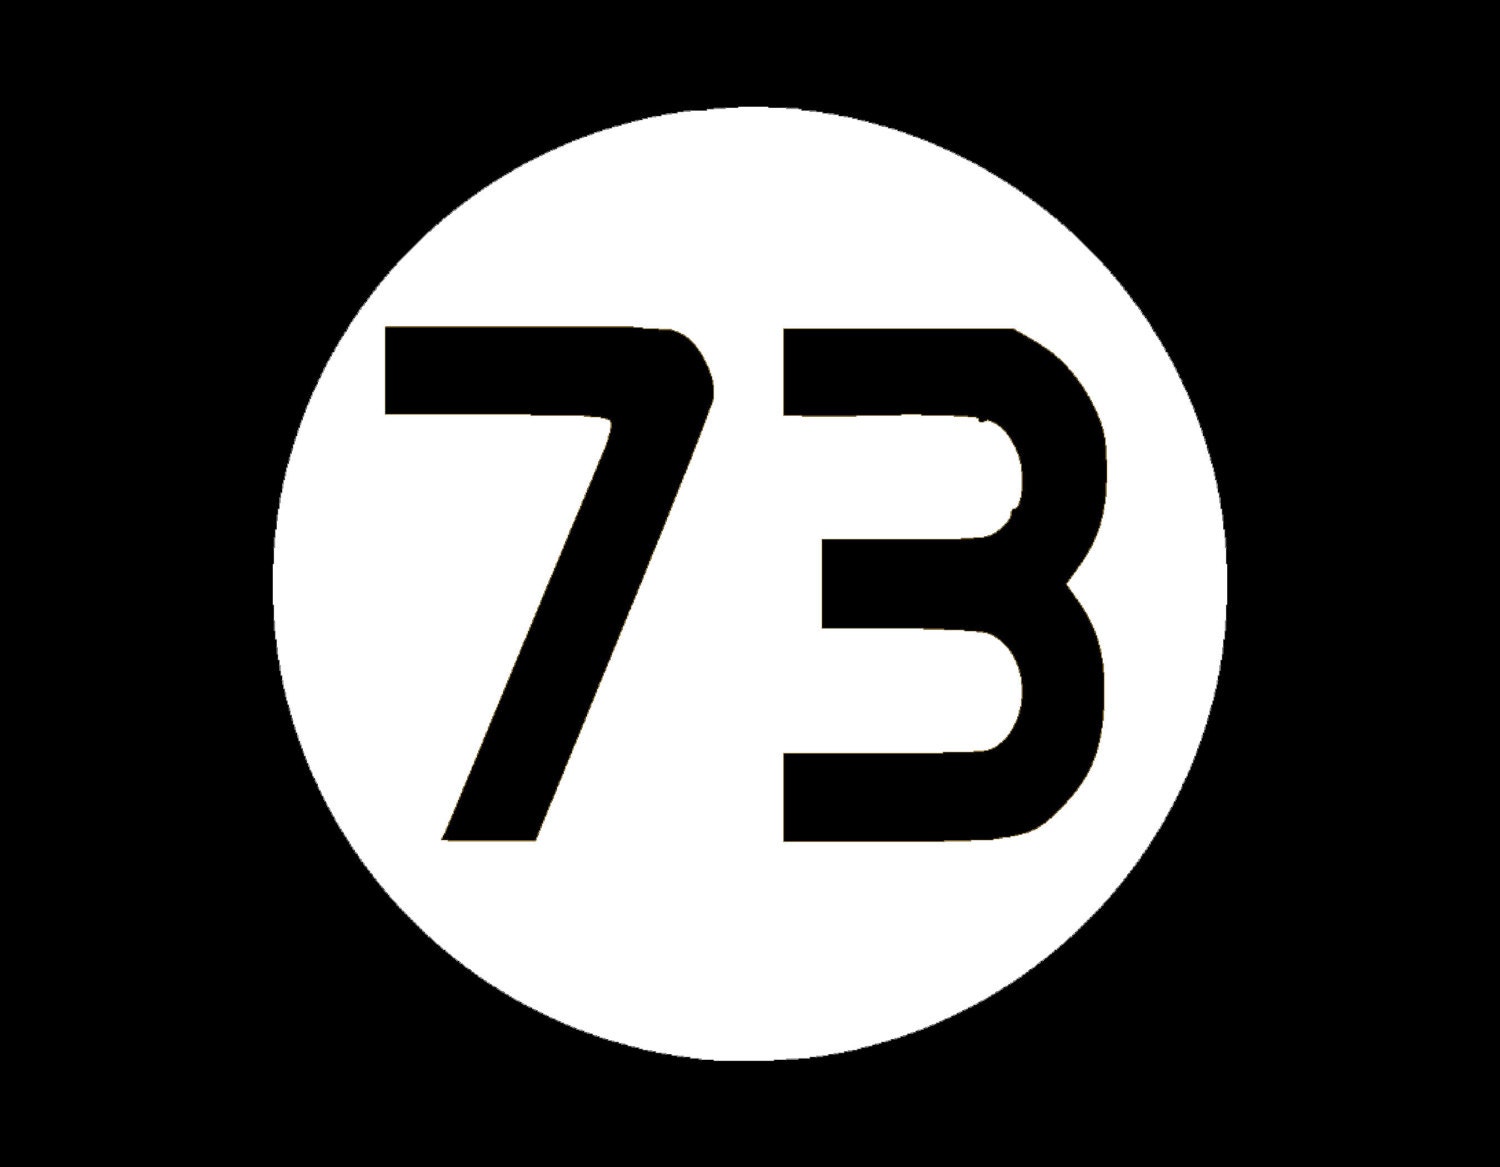 number-73-vinyl-window-decal-pick-your-size-and-color